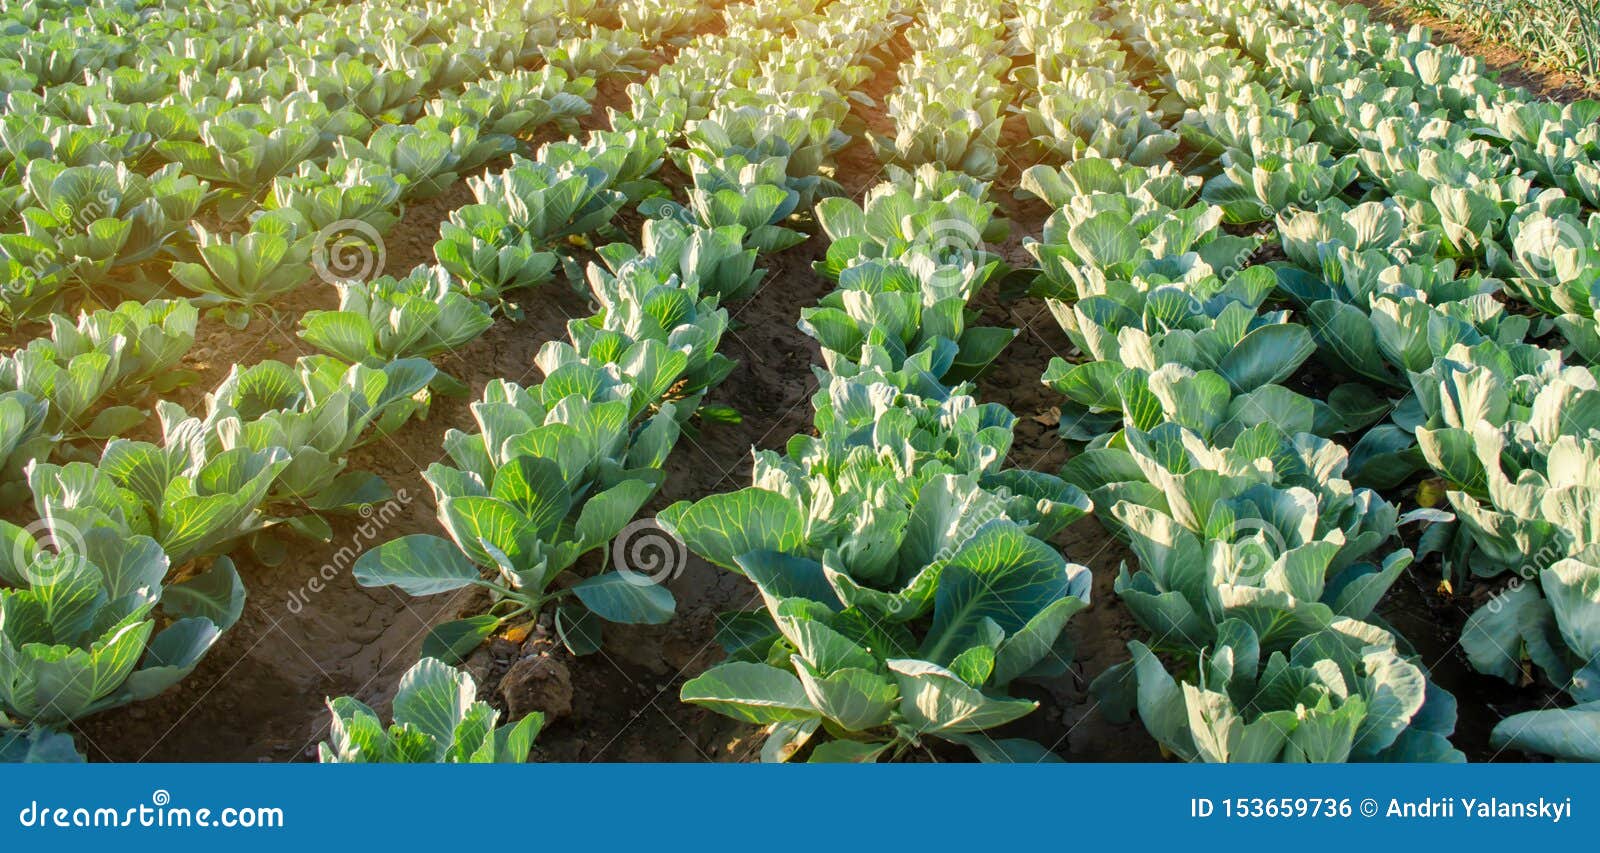 cabbage plantations grow in the field. fresh, organic vegetables. landscape agriculture. farmland, farming